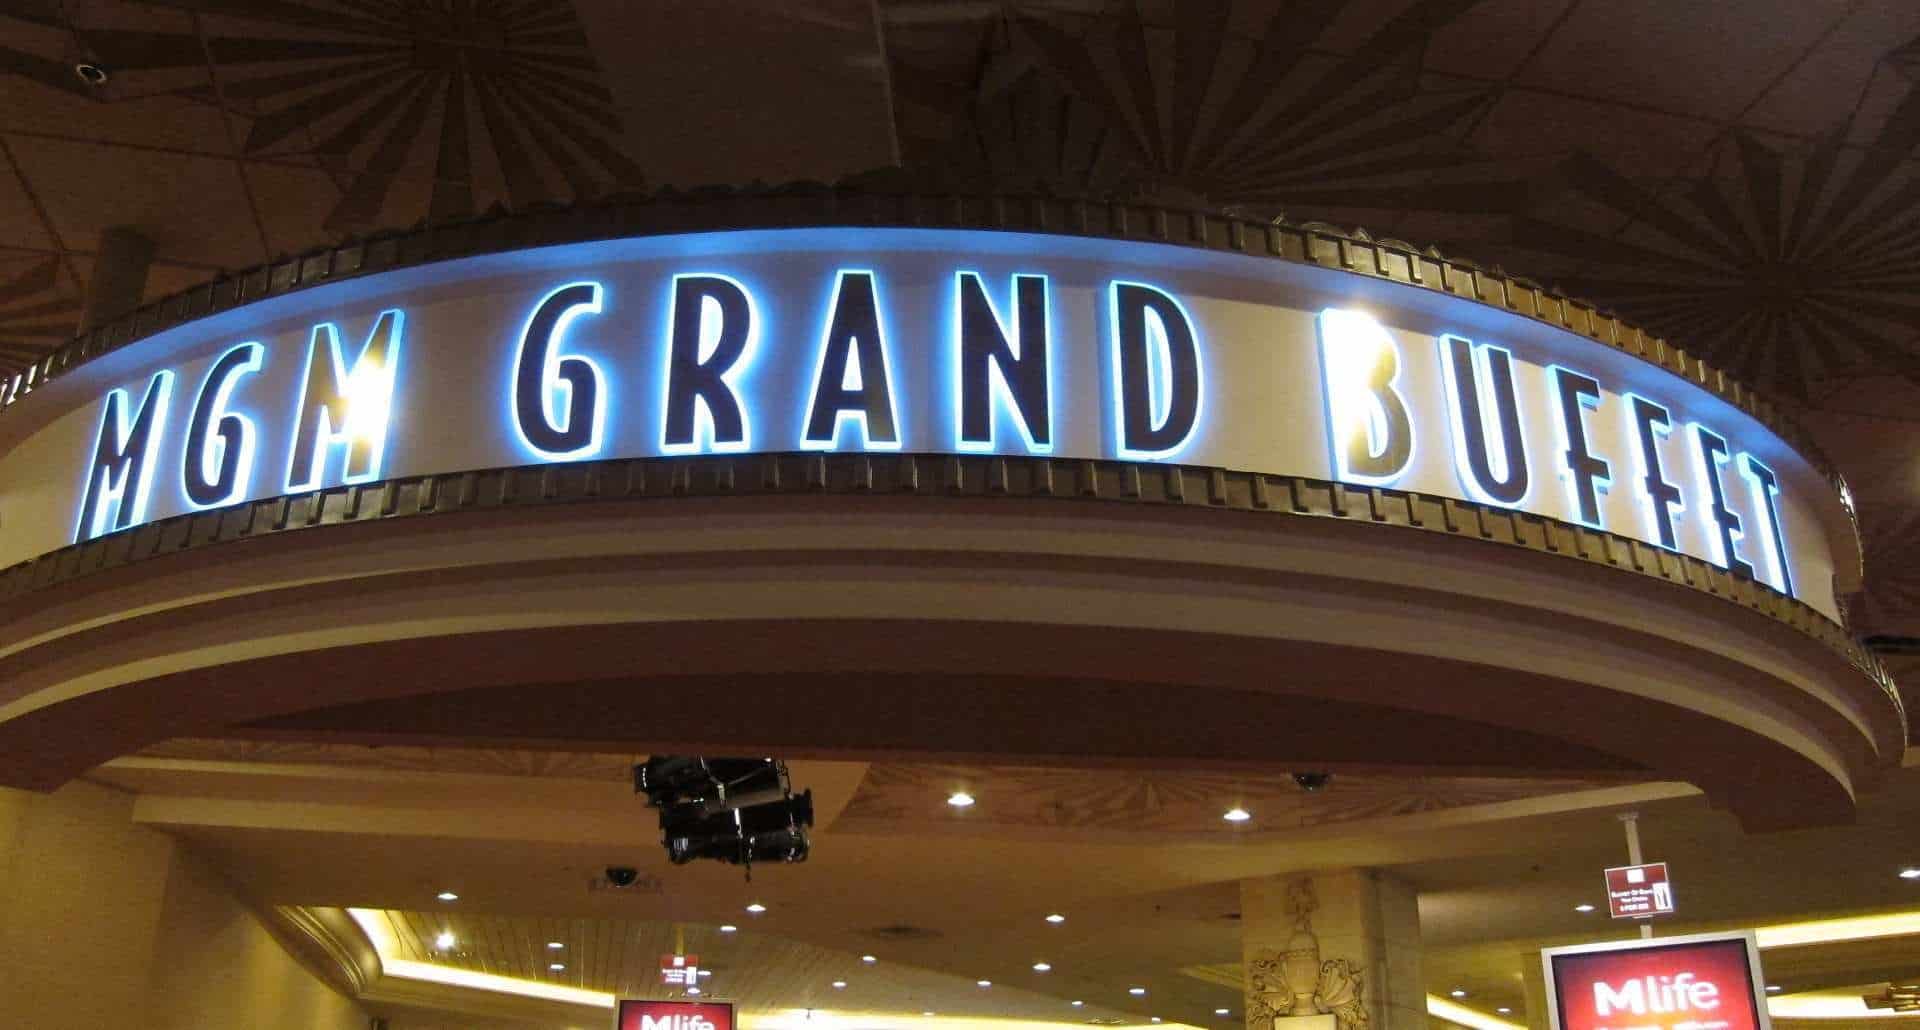 The MGM Grand Buffet returns on May 26 with breakfast, lunch, and brunch  options - Eater Vegas